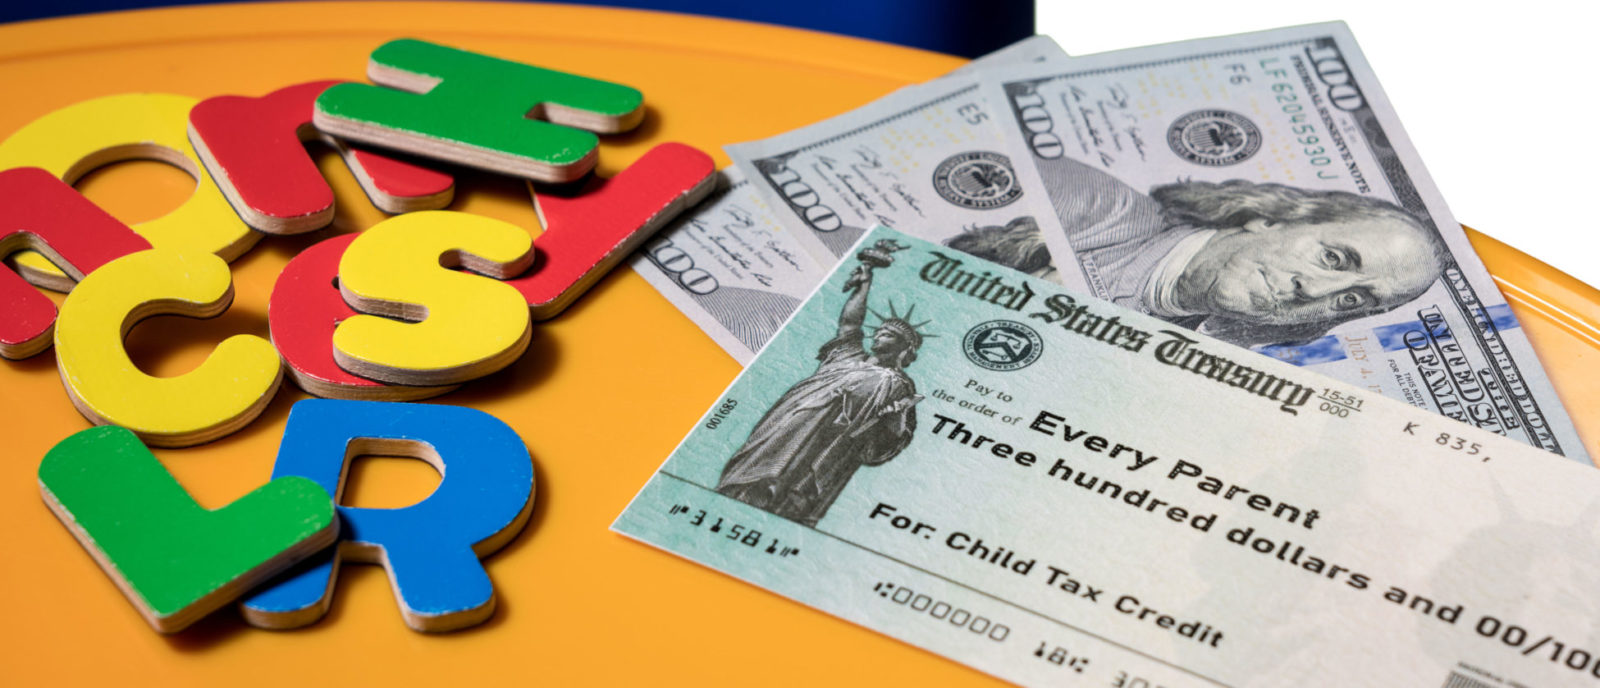 Tax services and the Child Tax Credit.